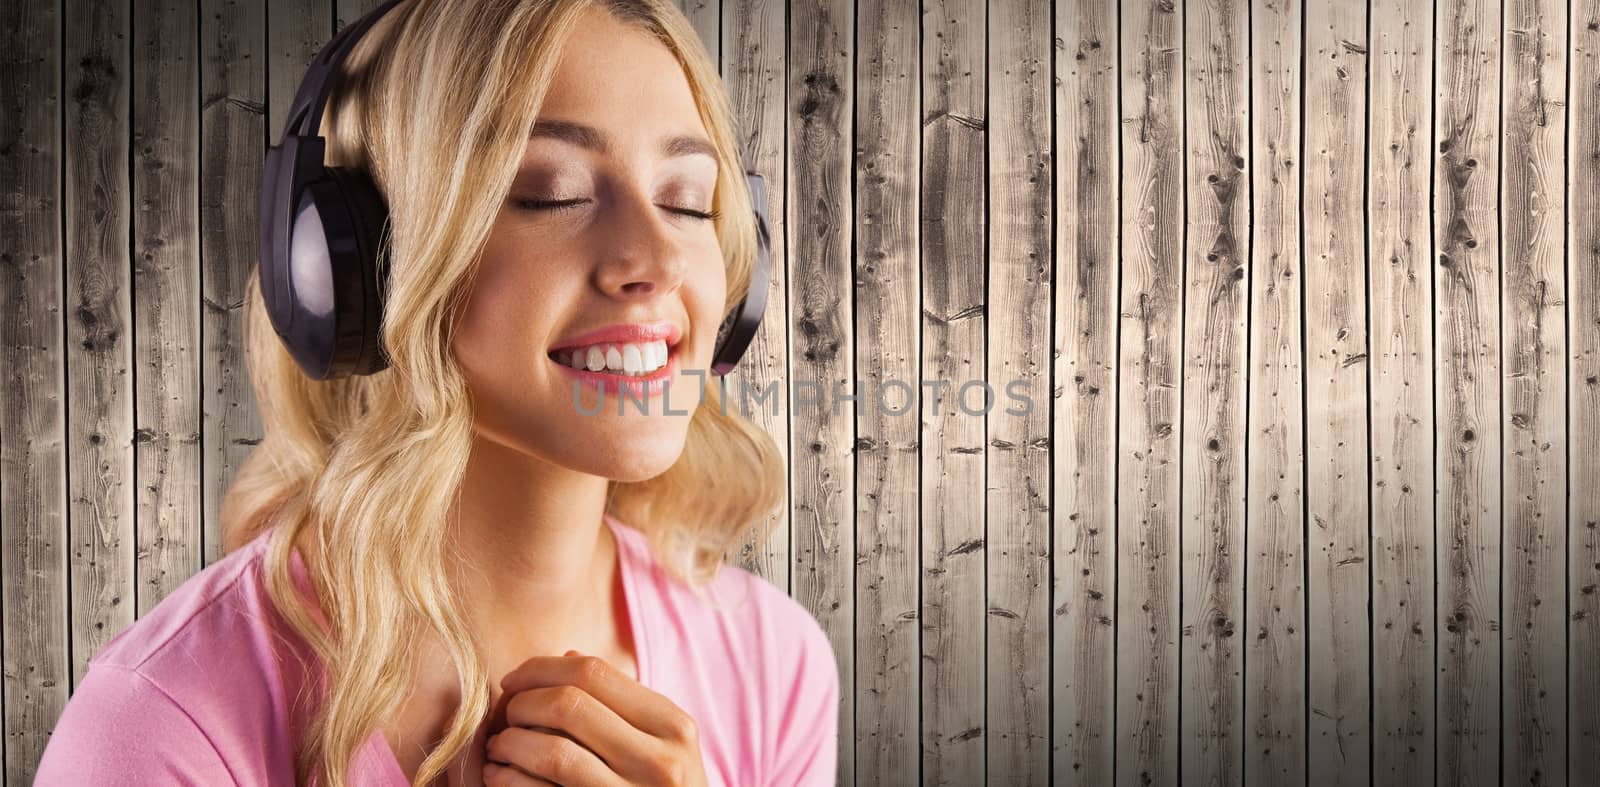 Close up of a woman listening to music  against wooden planks background